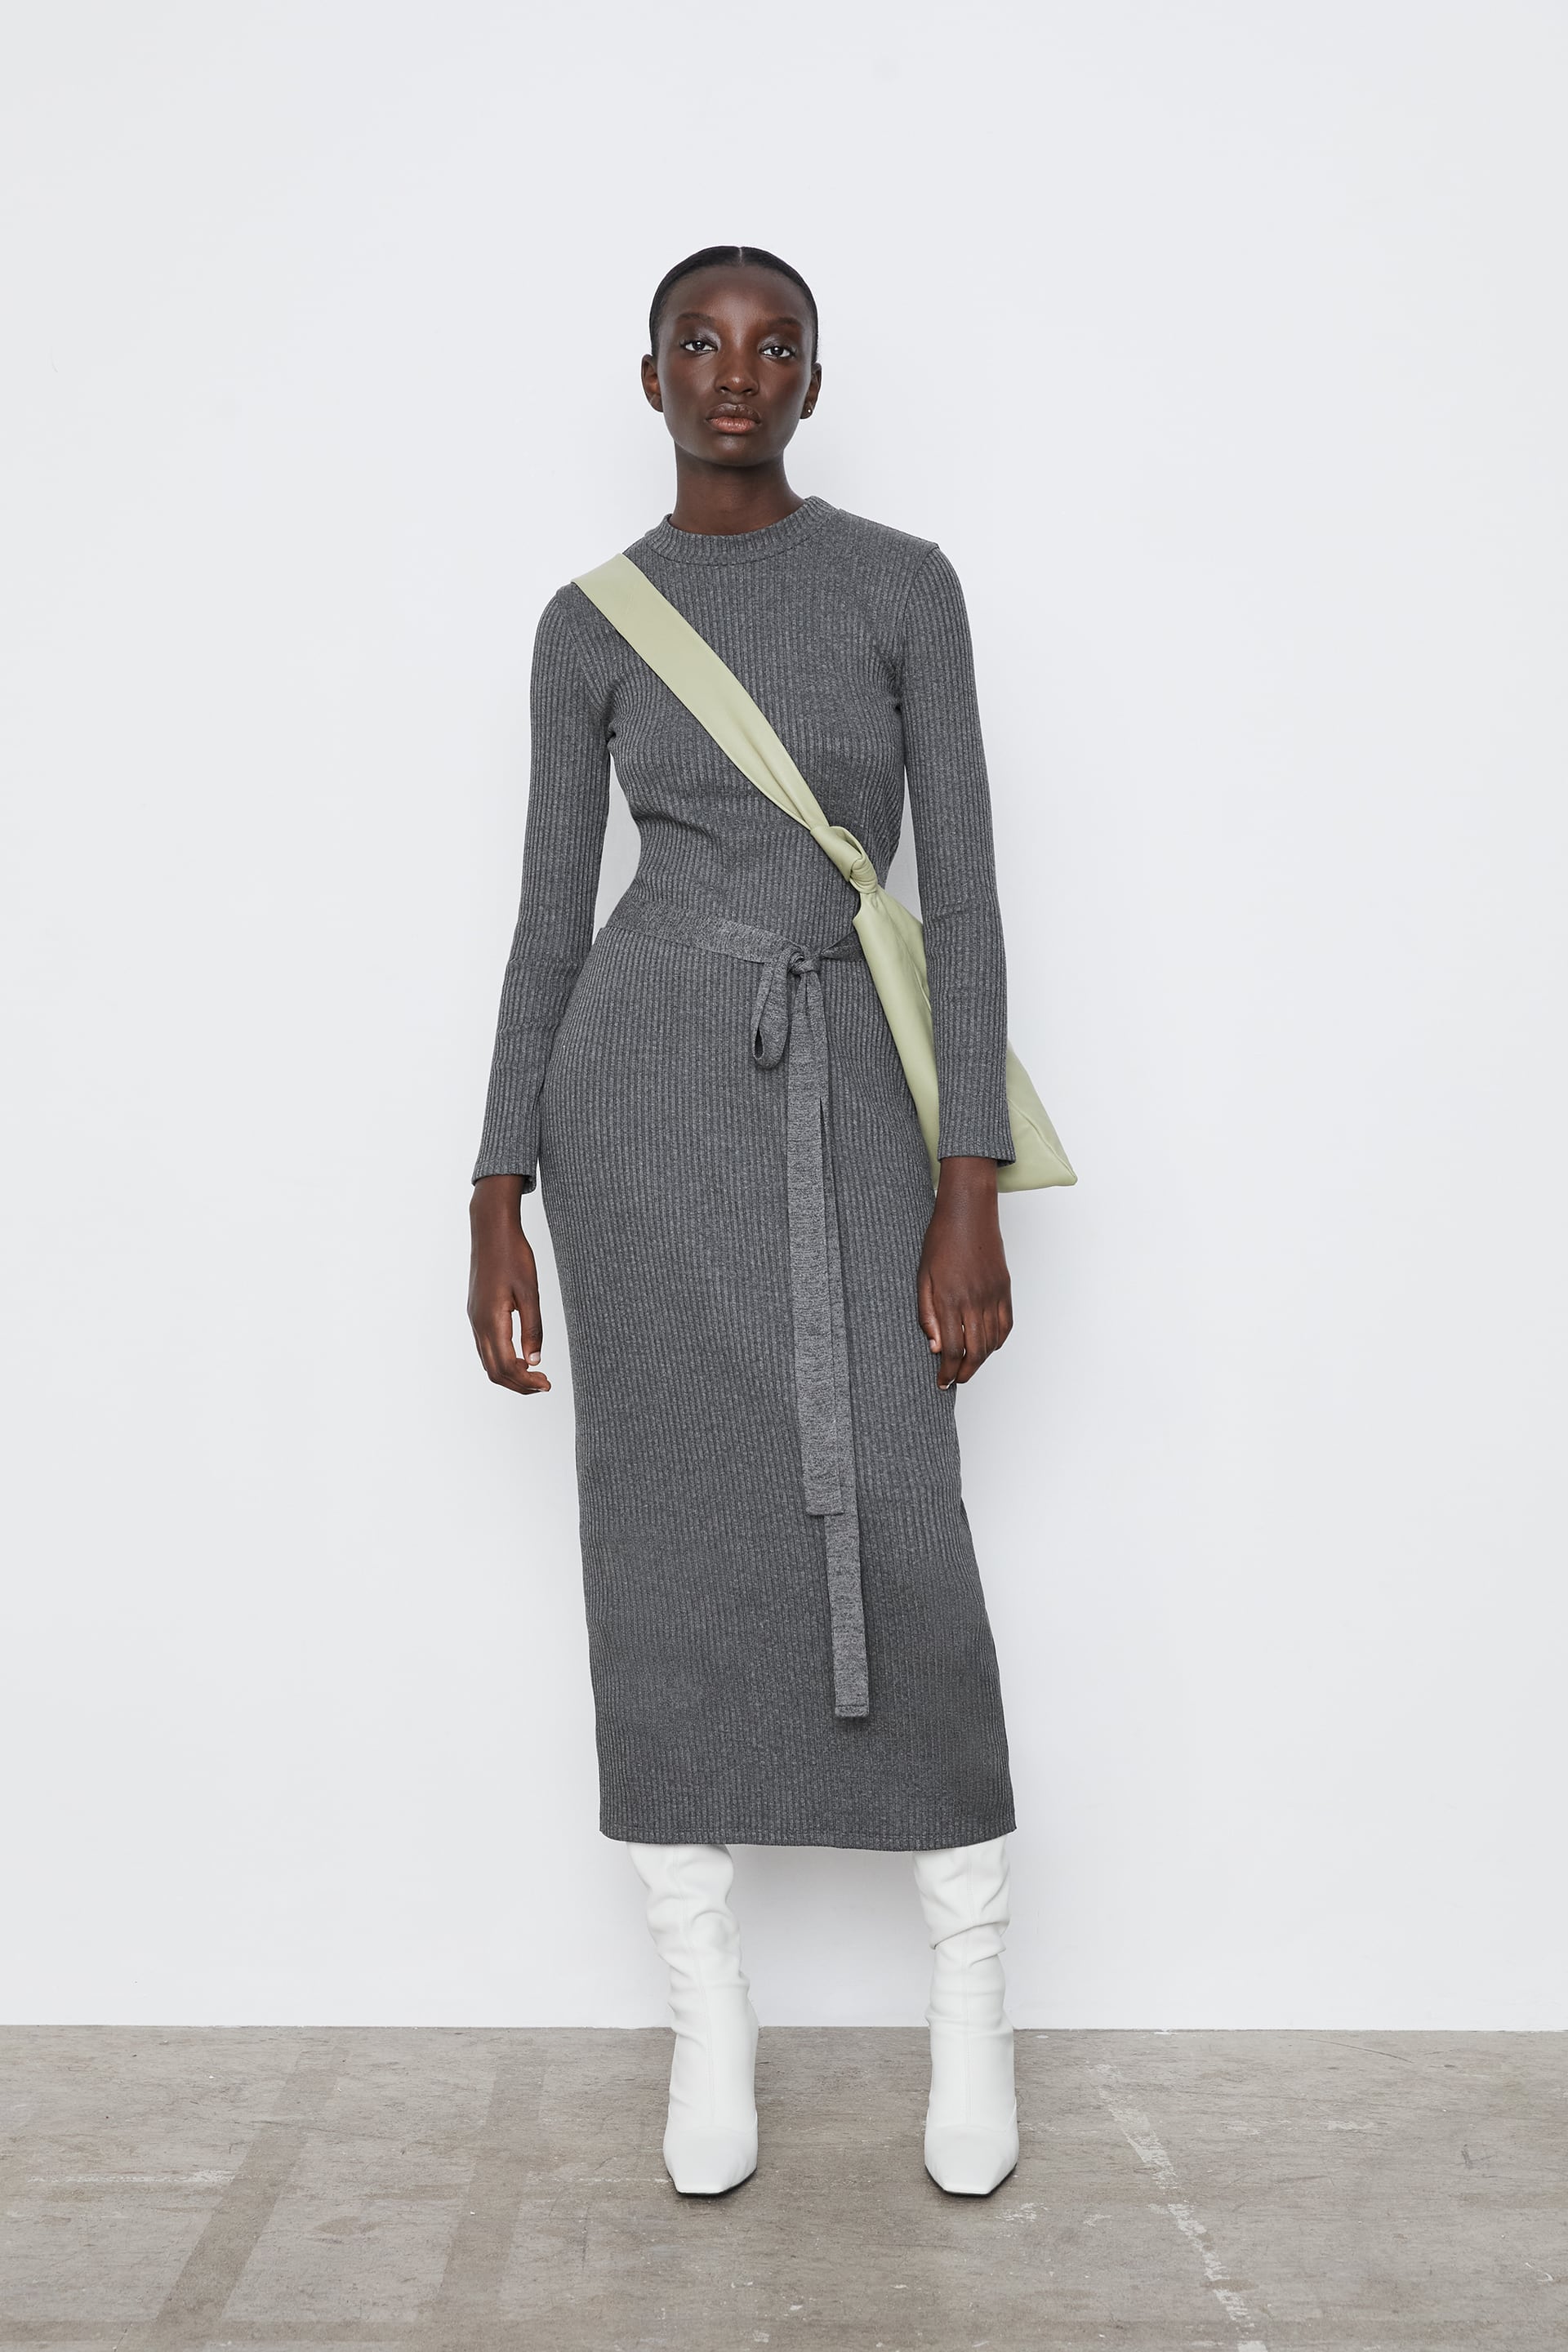 Our Selection Of The Best Winter Dresses Of 2020. Belted Dress from Zara